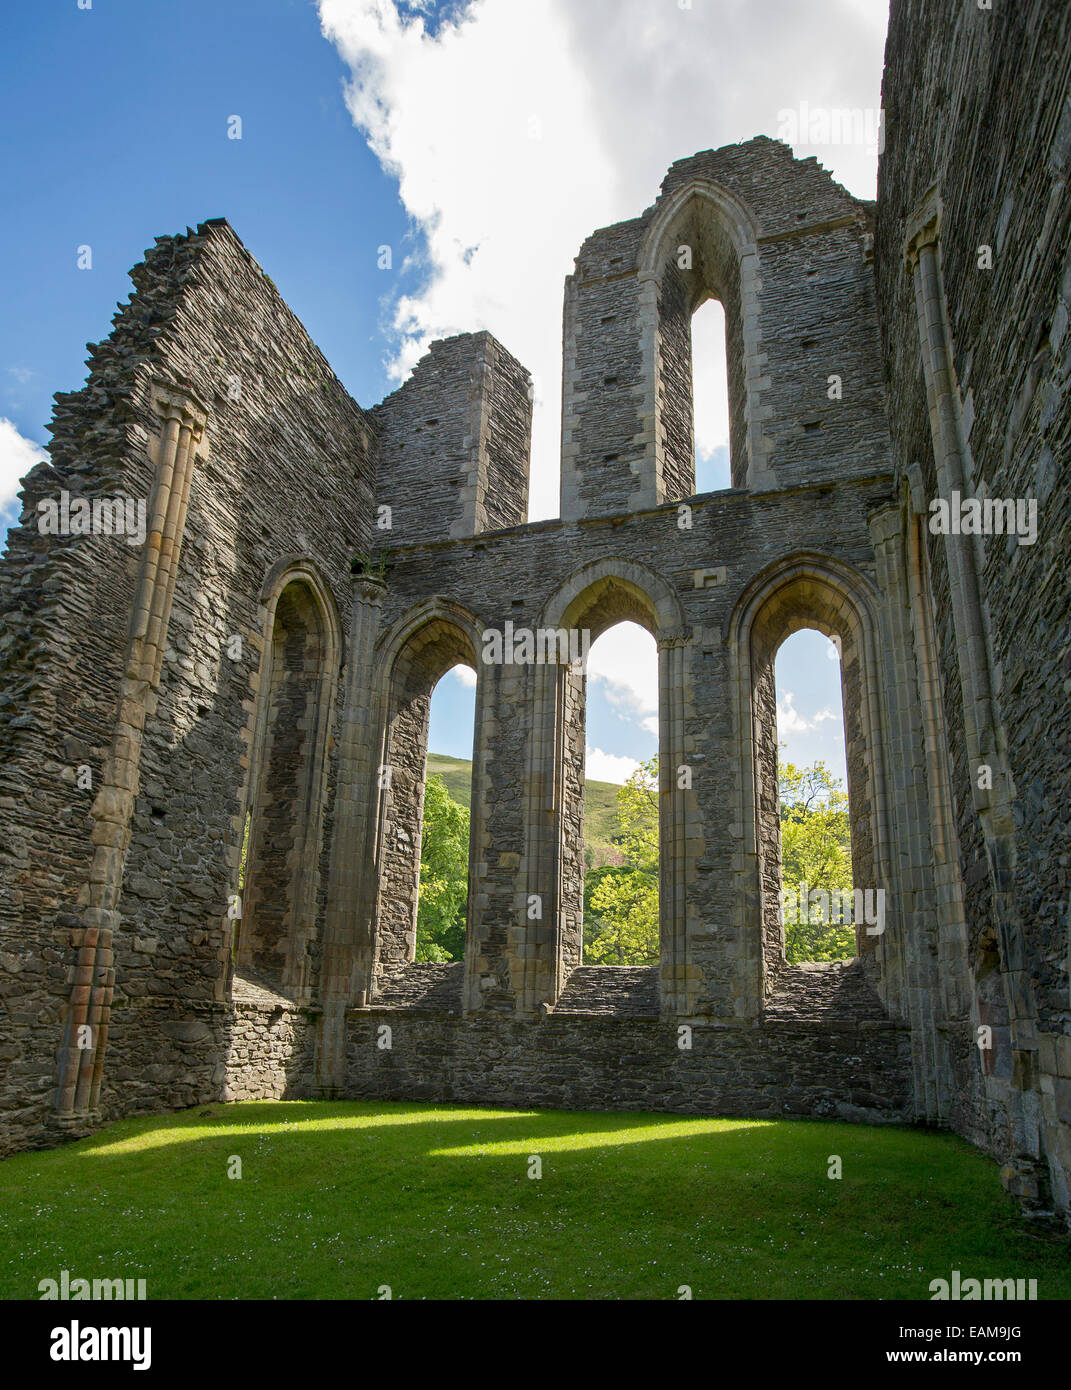 High stone walls of 13th century Valle Crusis abbey ruins rising from emerald grass to blue sky near Llantysilio in Wales Stock Photo